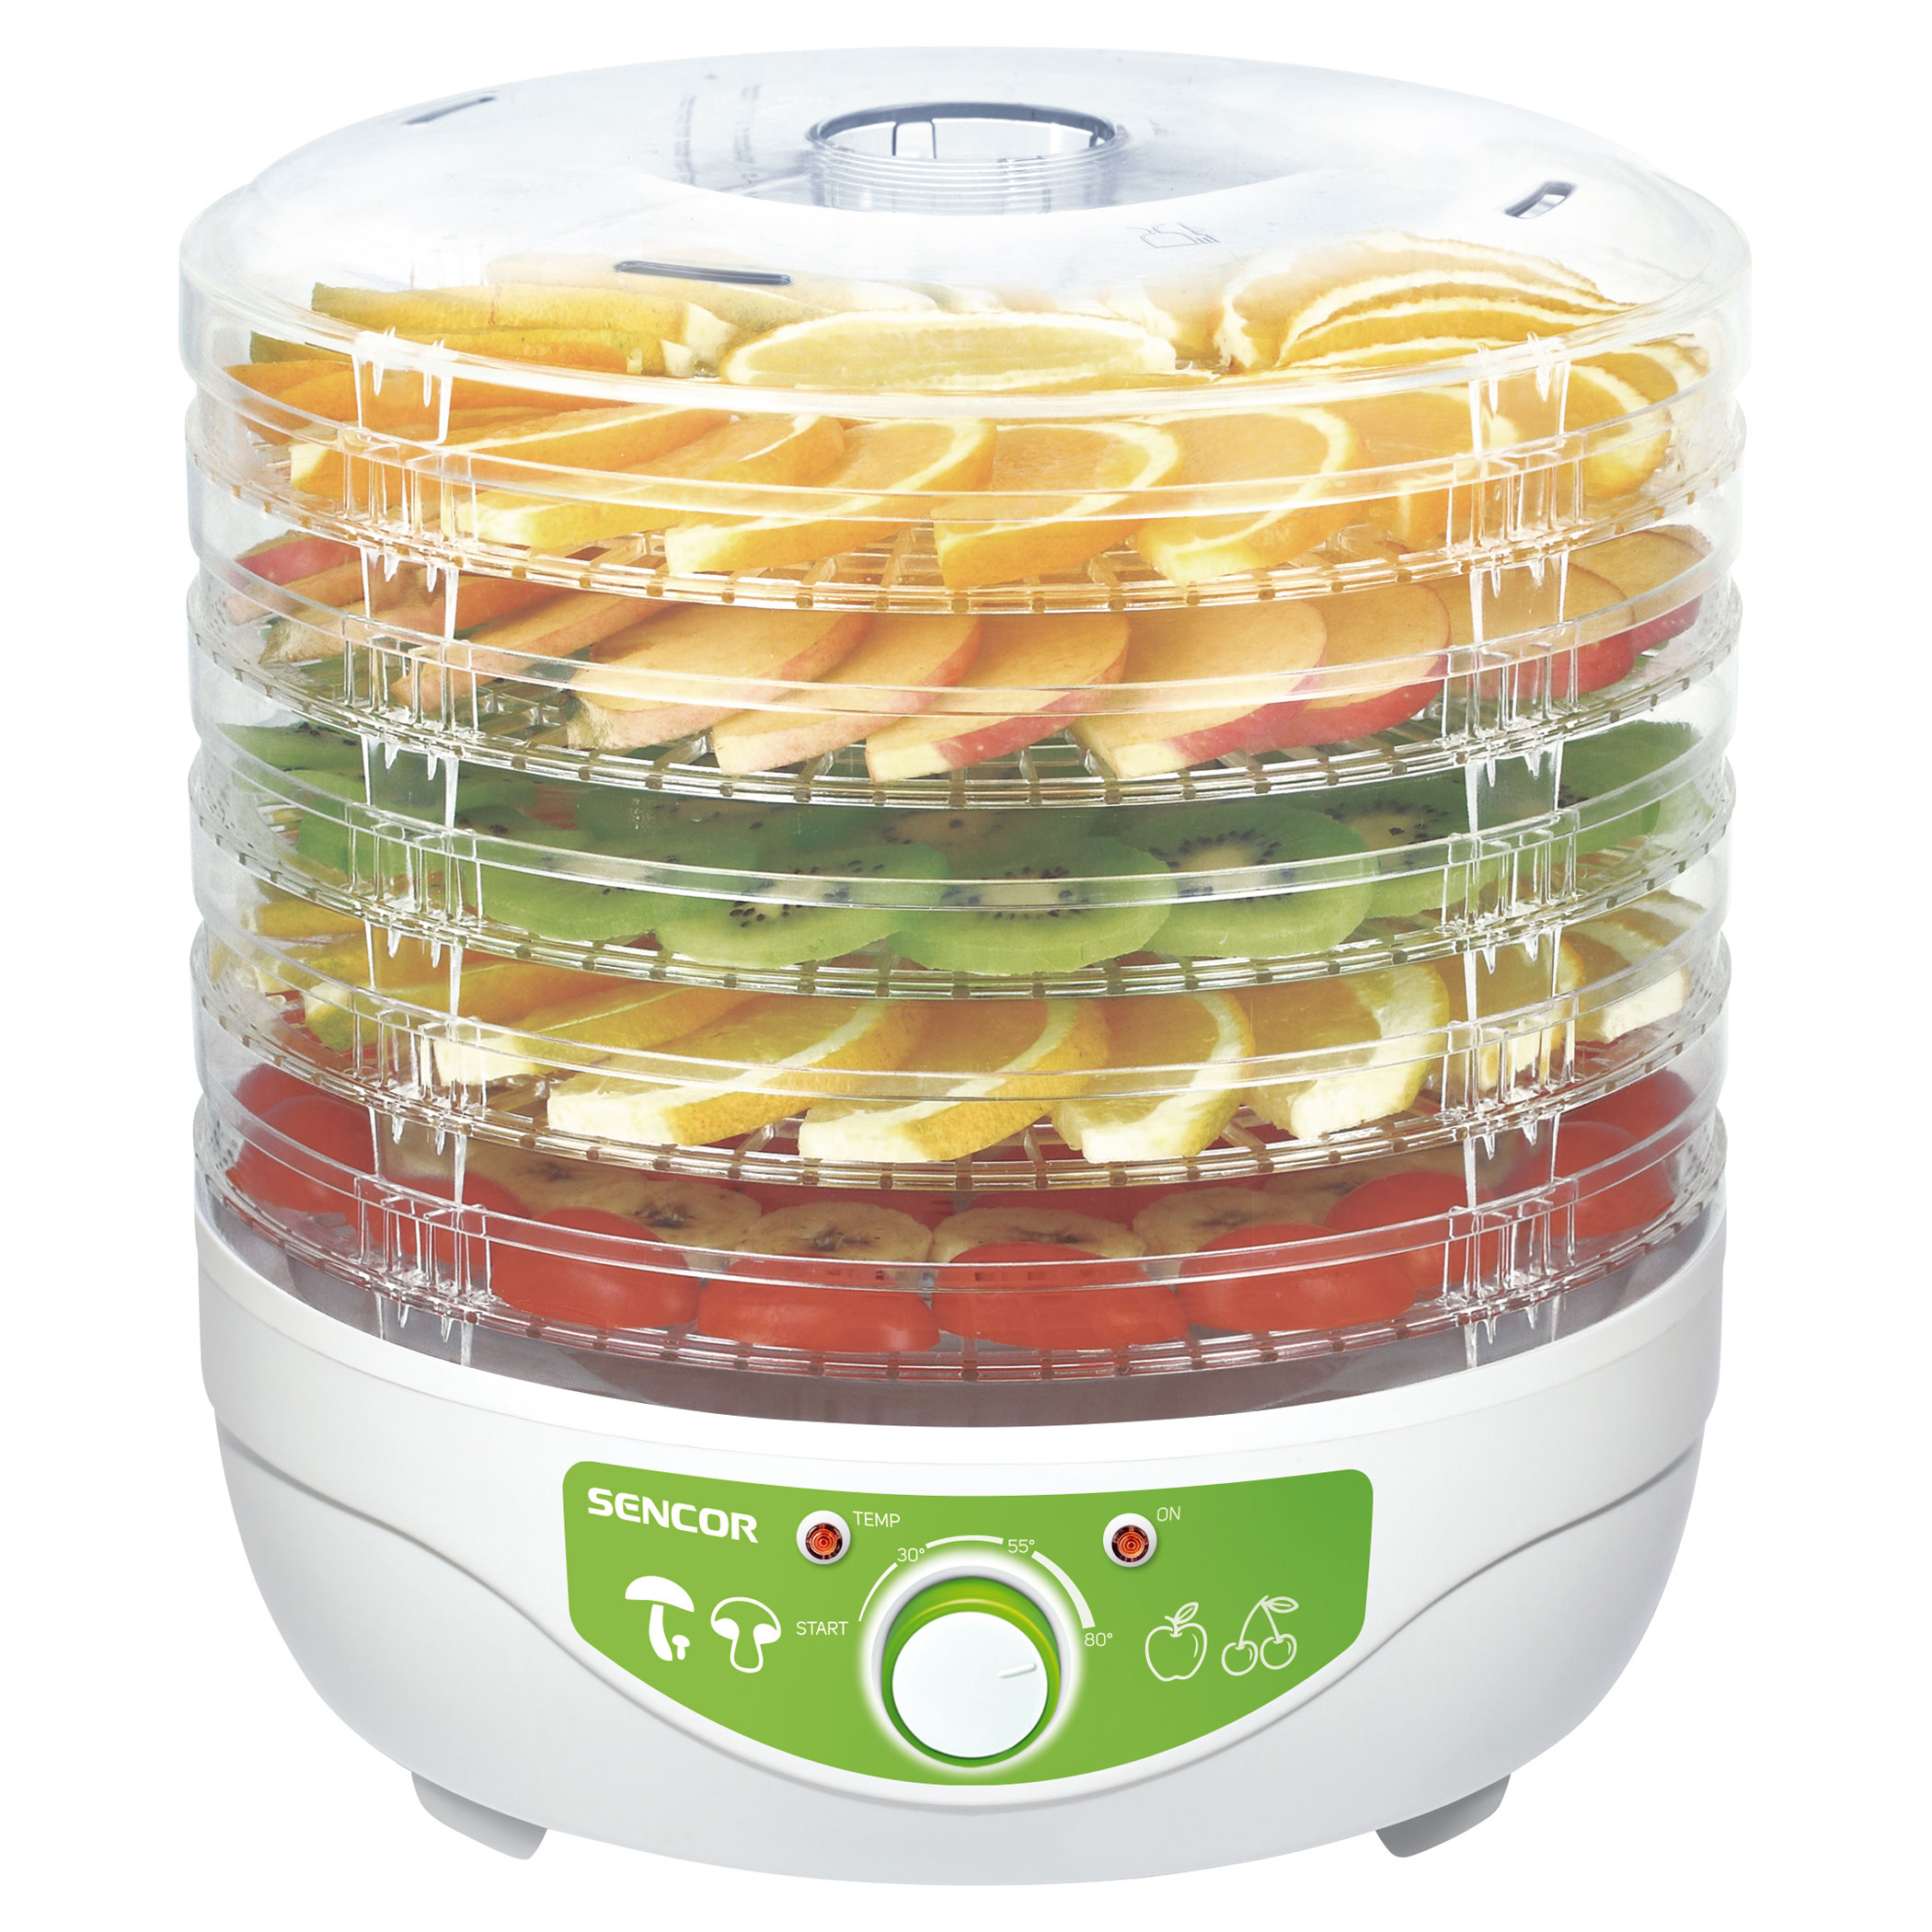 Shopping Tips for Food Dehydrators – You Asked It!